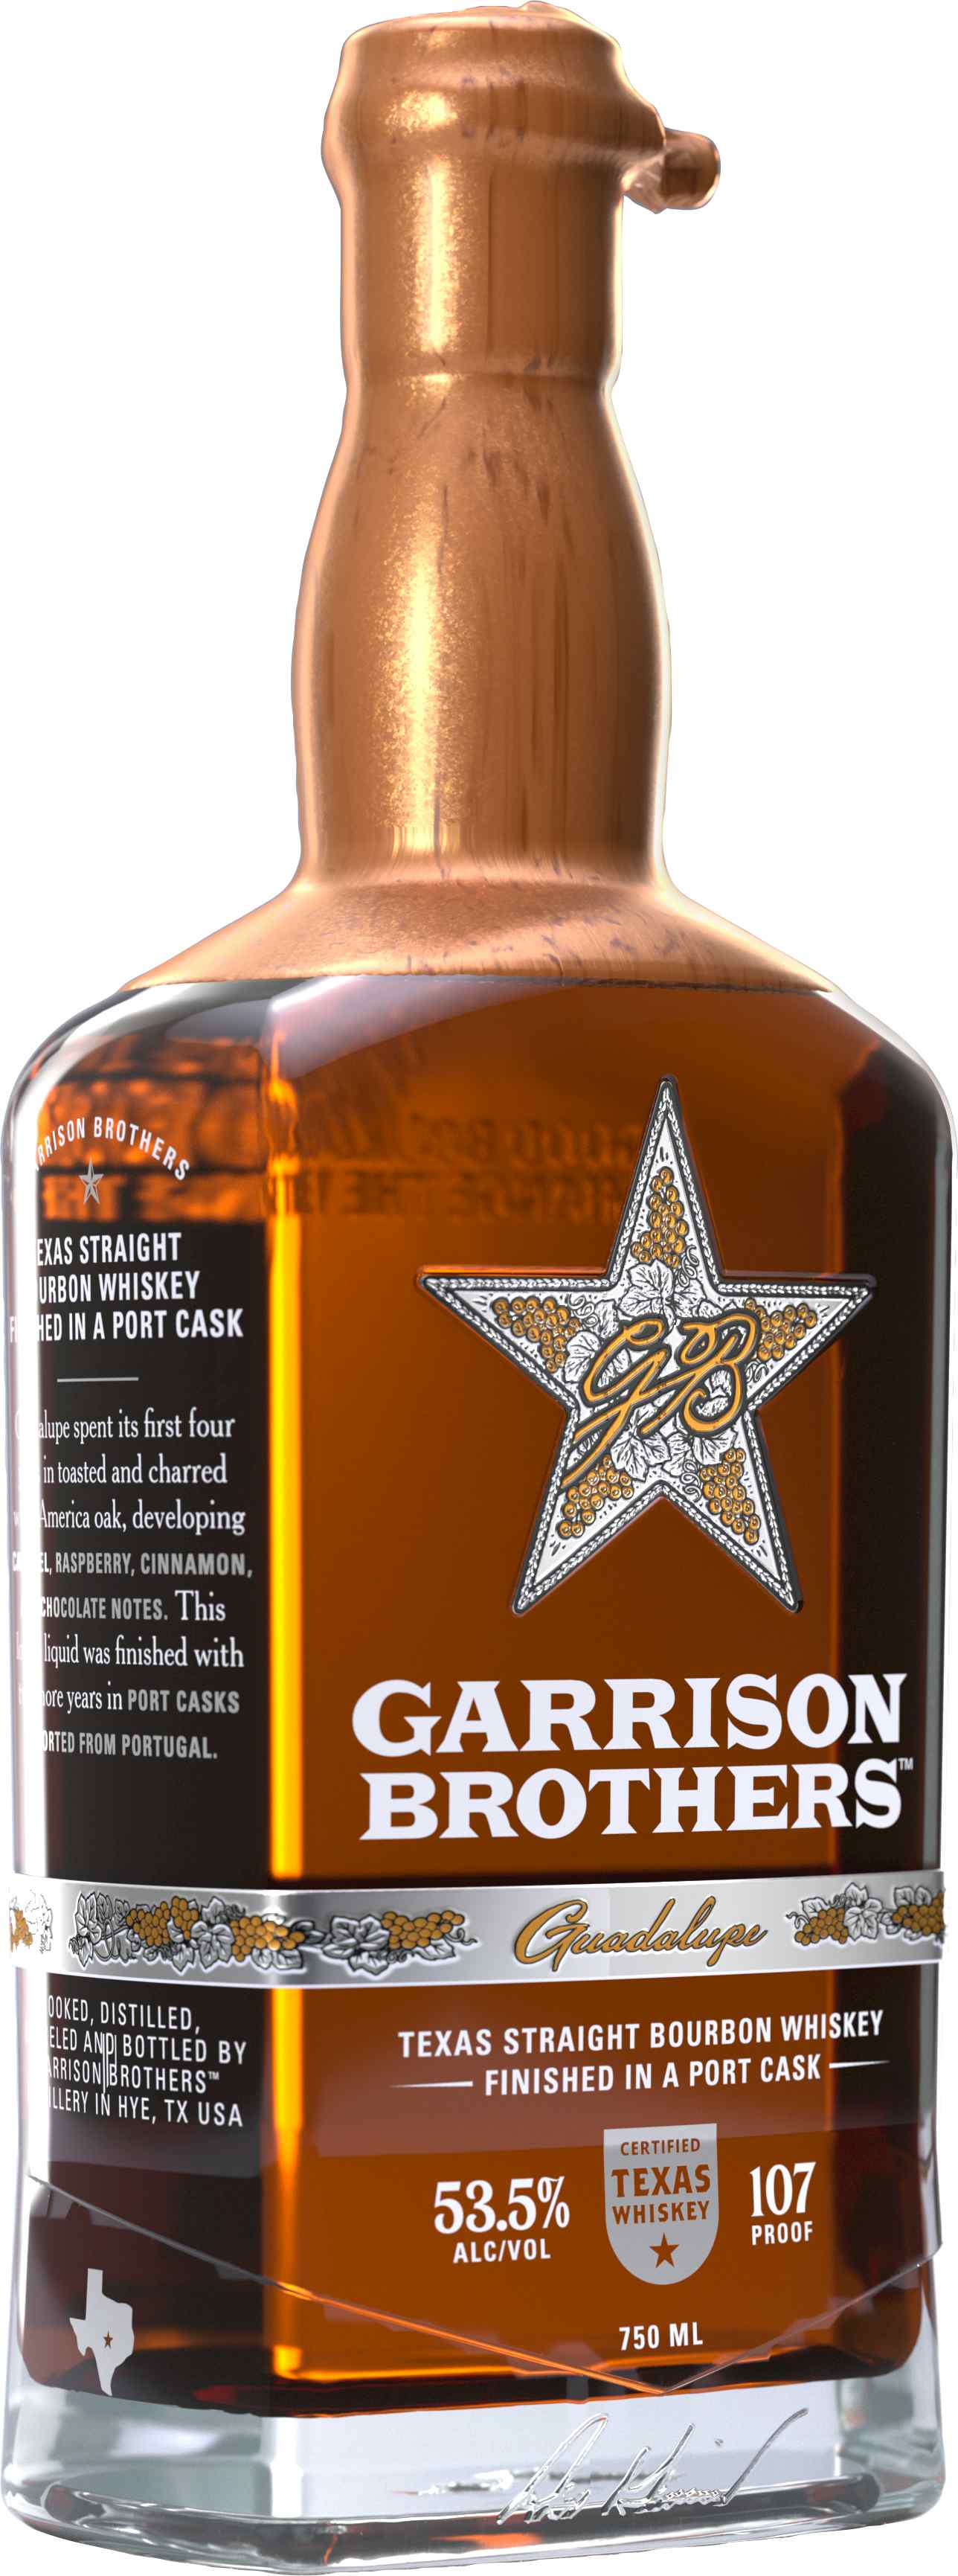 Garrison Brothers Guadalupe Port Cask Texas Straight Bourbon Whiskey